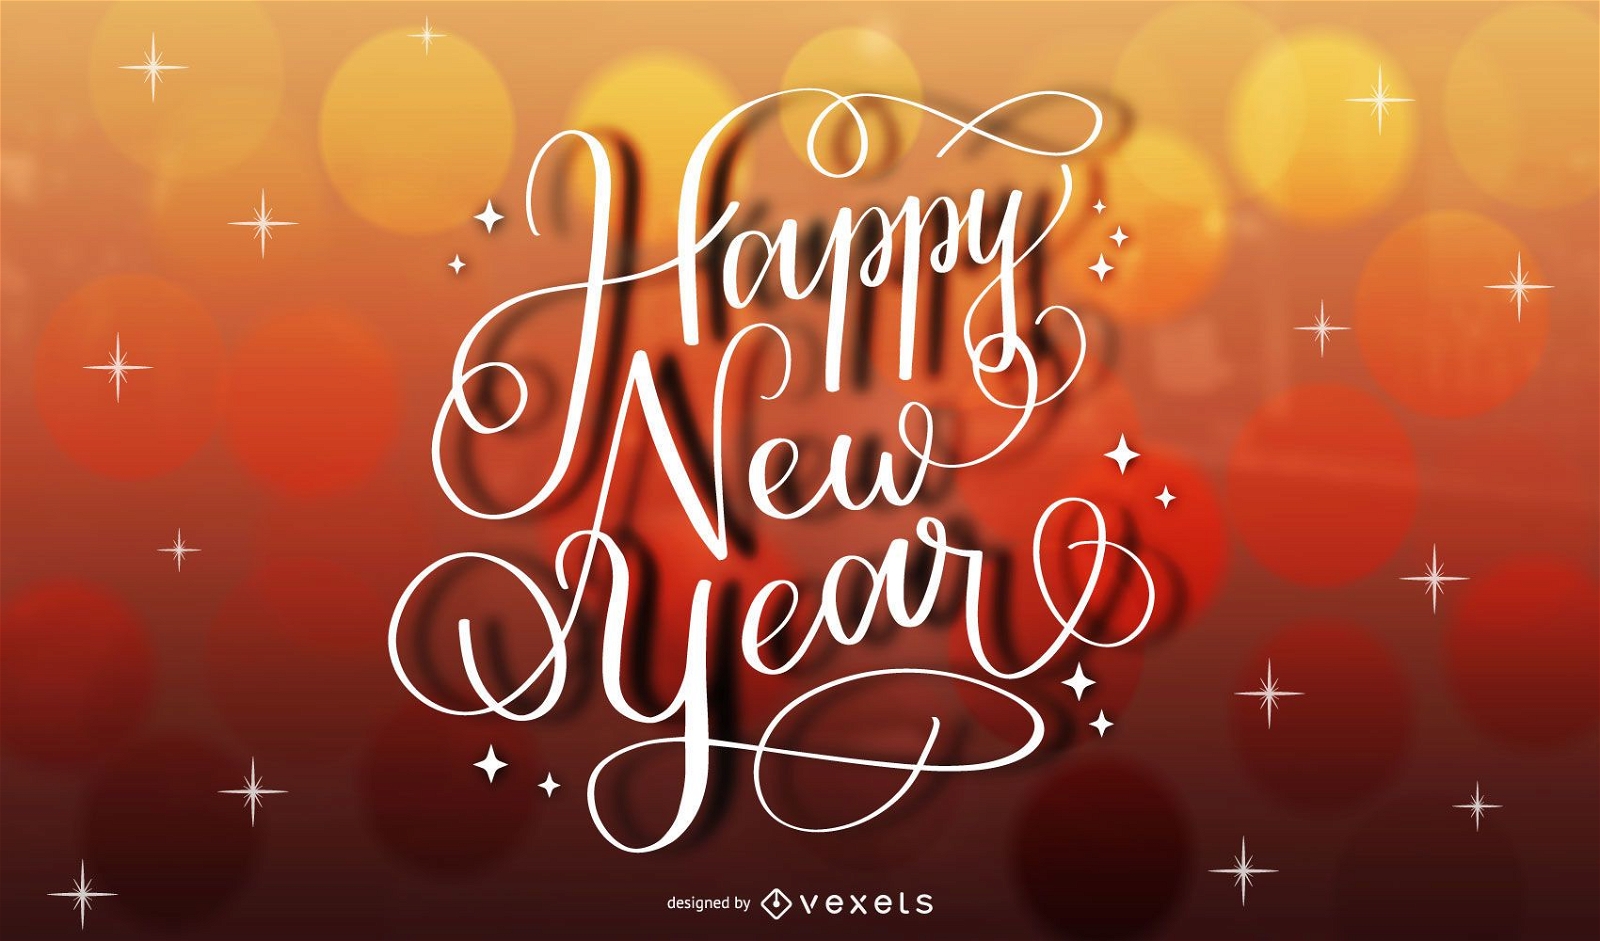 Creative New Year Gold Typography Red Background